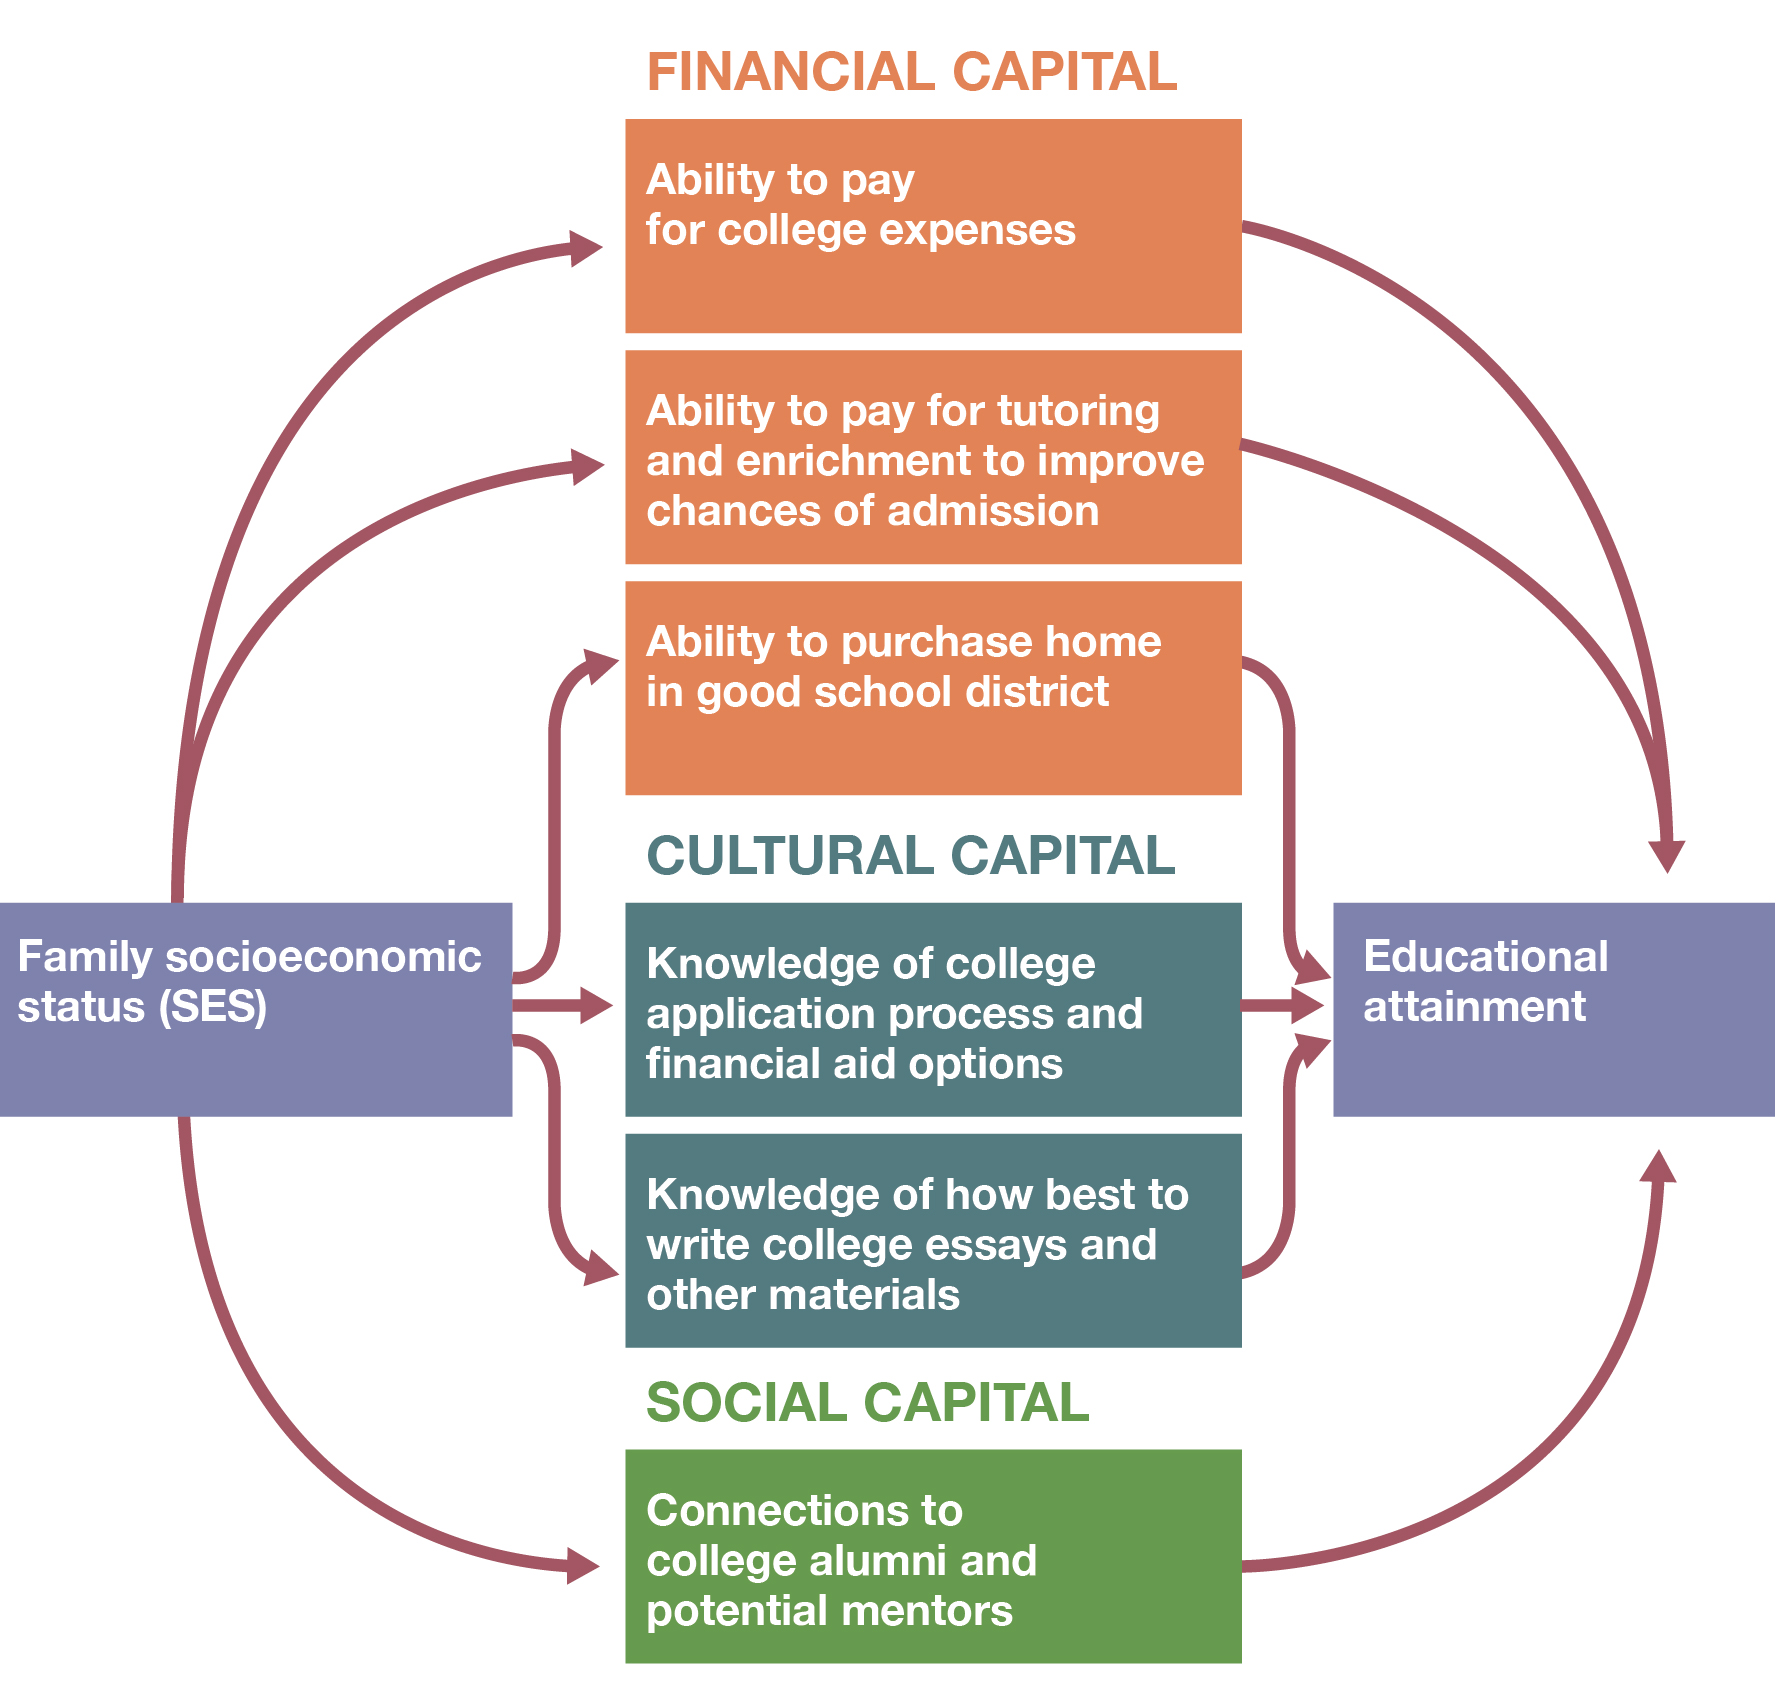 Figure 4.1. Example of a Concept Map Concept map specifying the relationship between family socioeconomic status and educational attainment through (1) financial capital: ability to pay for college expenses, ability to pay for tutoring and enrichment to improve chances of admission, and ability to purchase home in good school district; (2) cultural capital: knowledge of college application process and financial aid options and knowledge of how best to write college essays and other materials; and (3) social capital: connections to college alumni and potential mentors.